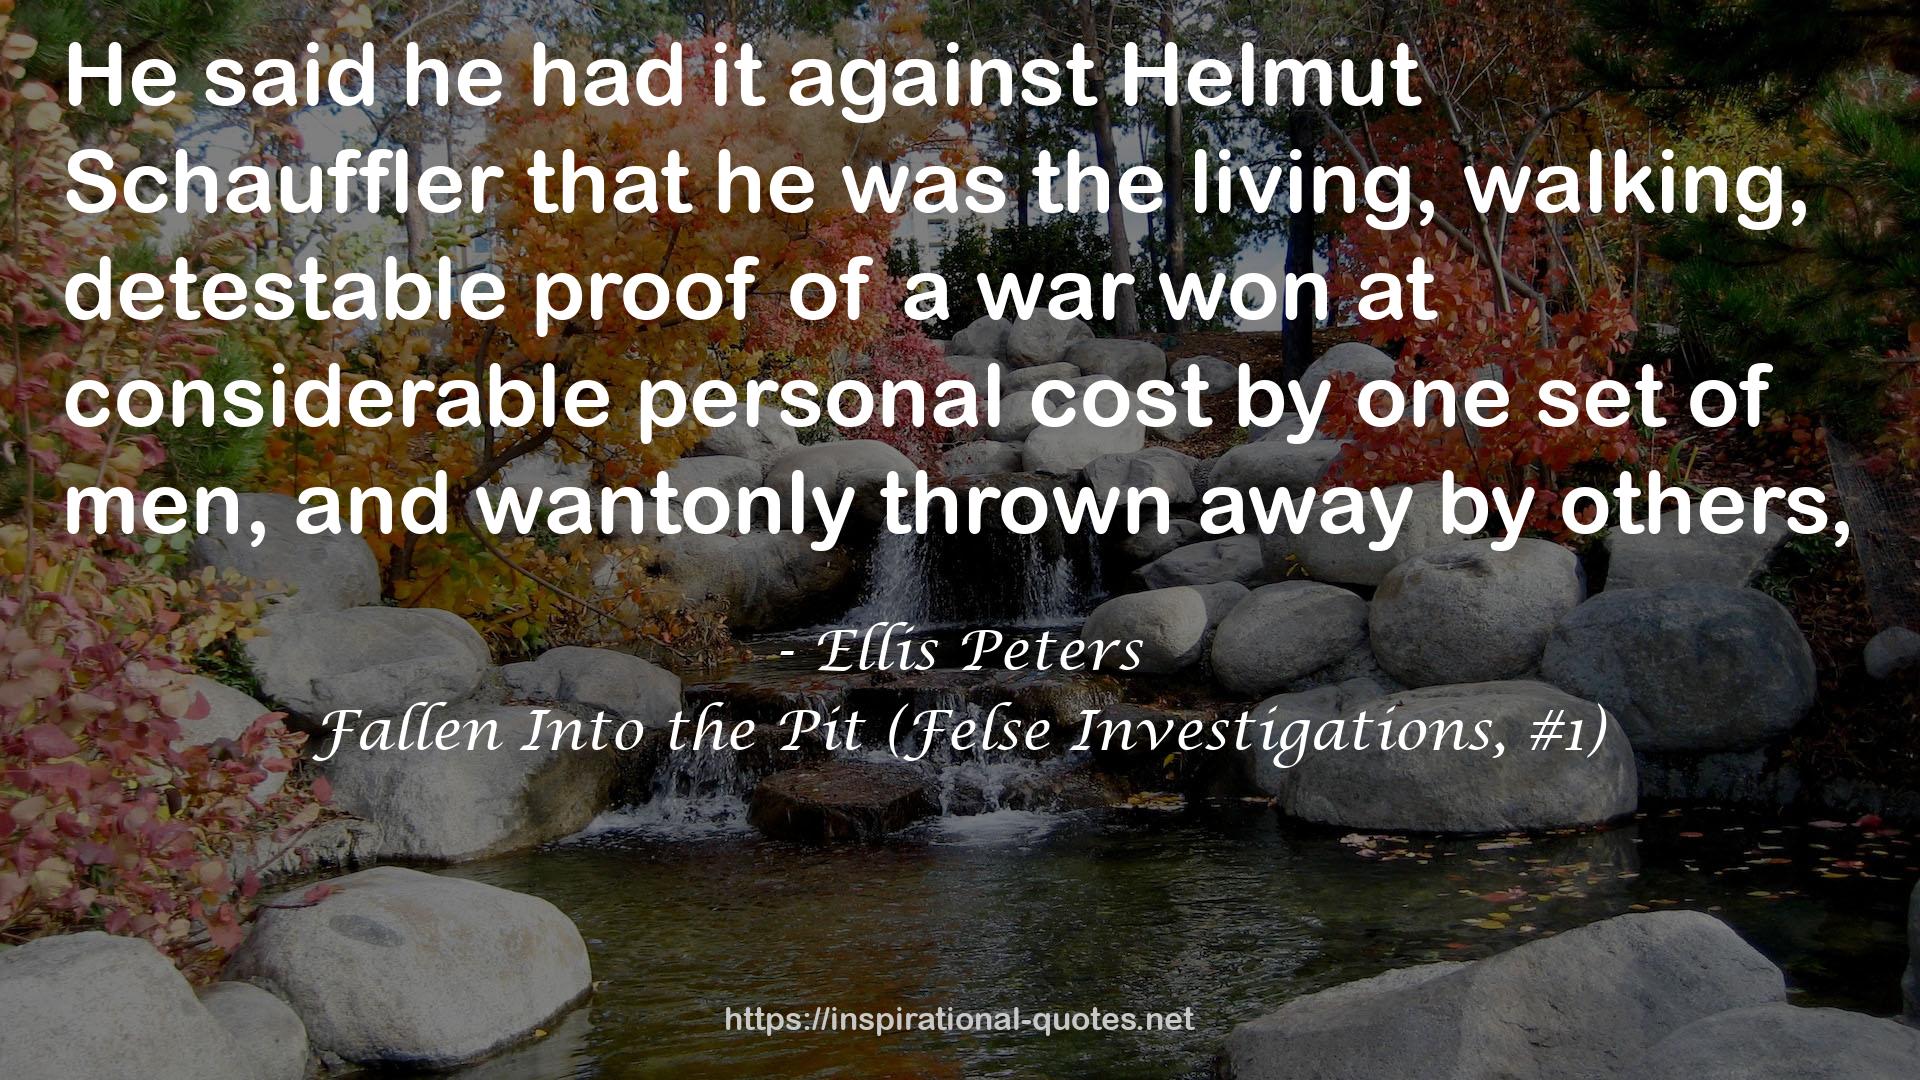 Fallen Into the Pit (Felse Investigations, #1) QUOTES